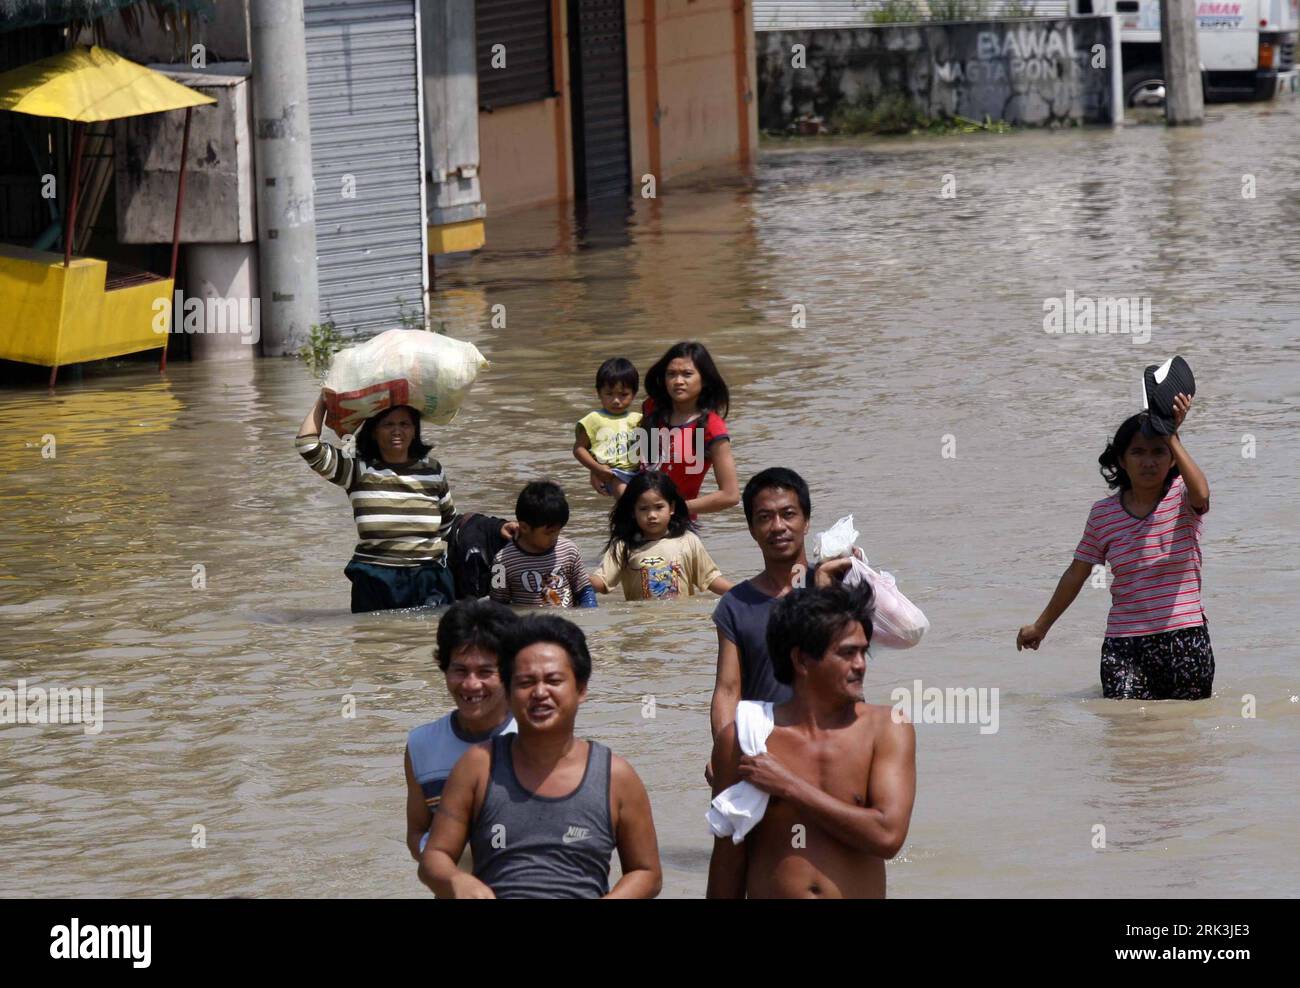 Bildnummer: 53522544  Datum: 10.10.2009  Copyright: imago/Xinhua (091010) -- MANILA, Oct. 10, 2009 (Xinhua) -- Filipinos wade in flooded street of Dagupan town, Pangasinan province, northern Philippines on 10 October 2009. The death toll in landslides and floods that hit the northern Philippines in the wake of typhoon Parma reached 299 as rescuers struggled through mud and raging waters in search of dozens of still missing, officials said. (Xinhua/Sybhel Cordero) (1)PHILIPPINES-MANILA-FLOOD PUBLICATIONxNOTxINxCHN Naturkatastrophen Überschwemmung Taifun Parma kbdig xsk 2009 quer o0 Straße Perso Stock Photo